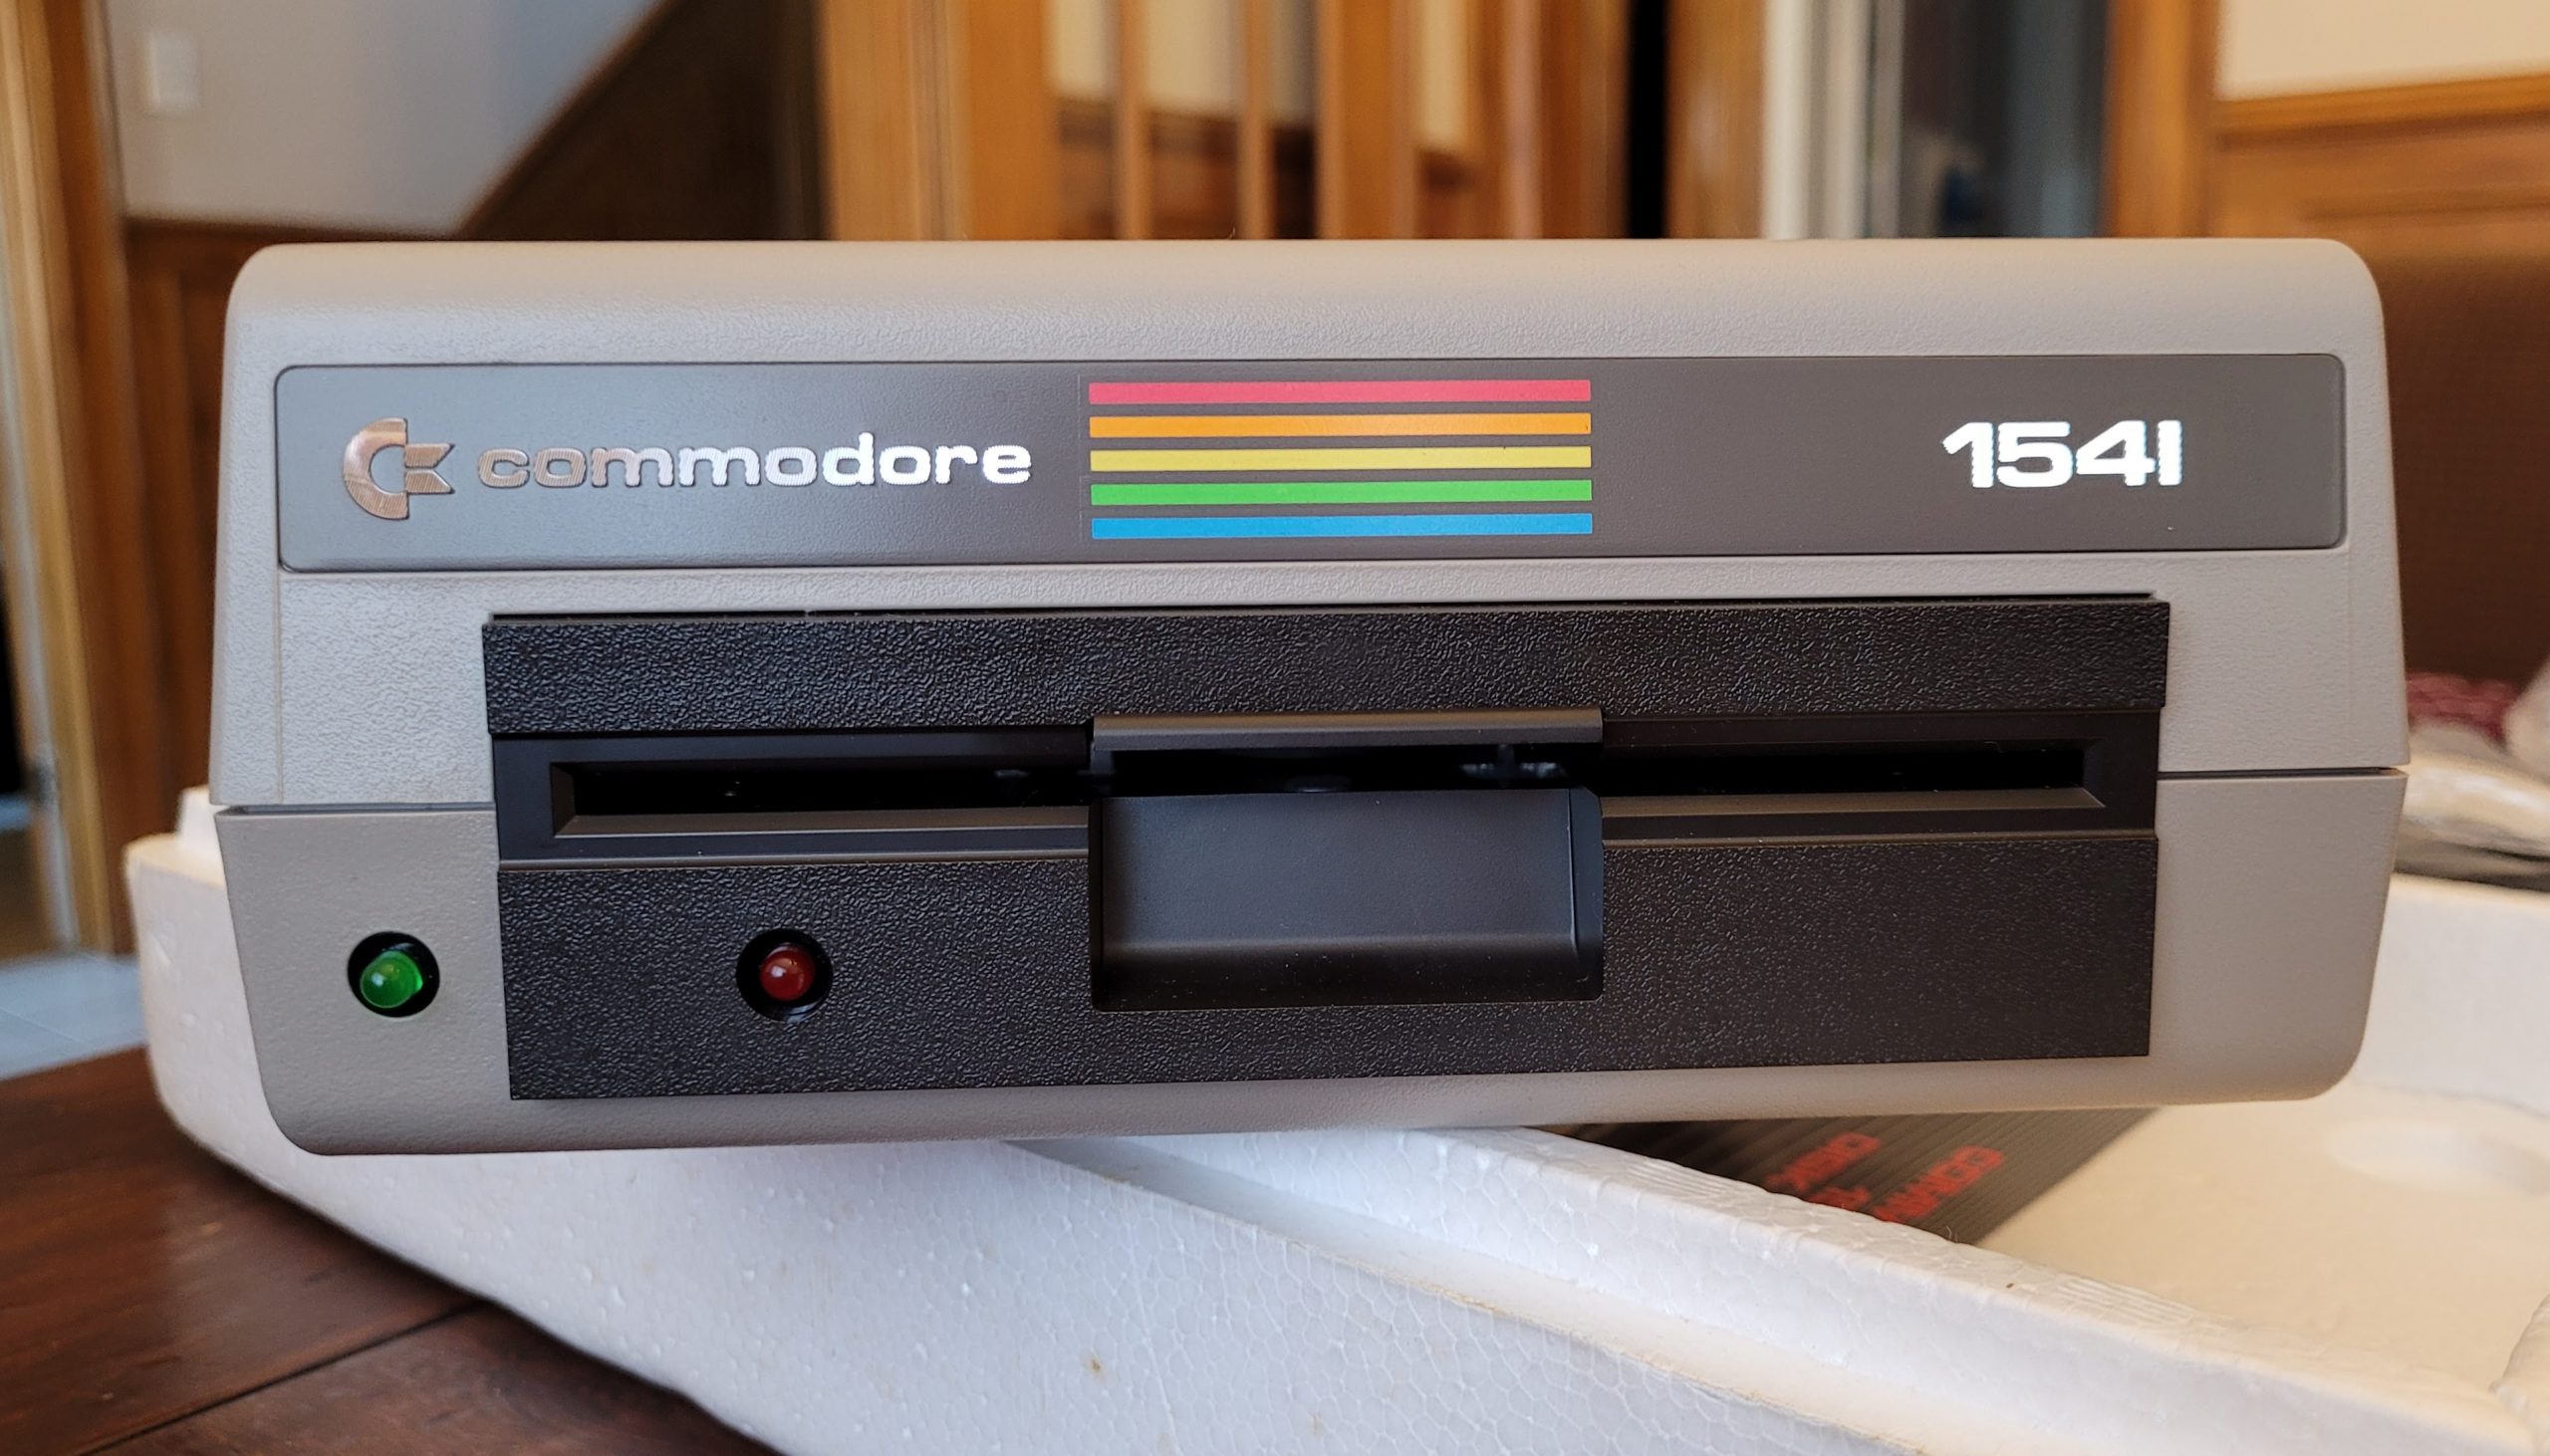 Commodore 1541 Disk Drive, front